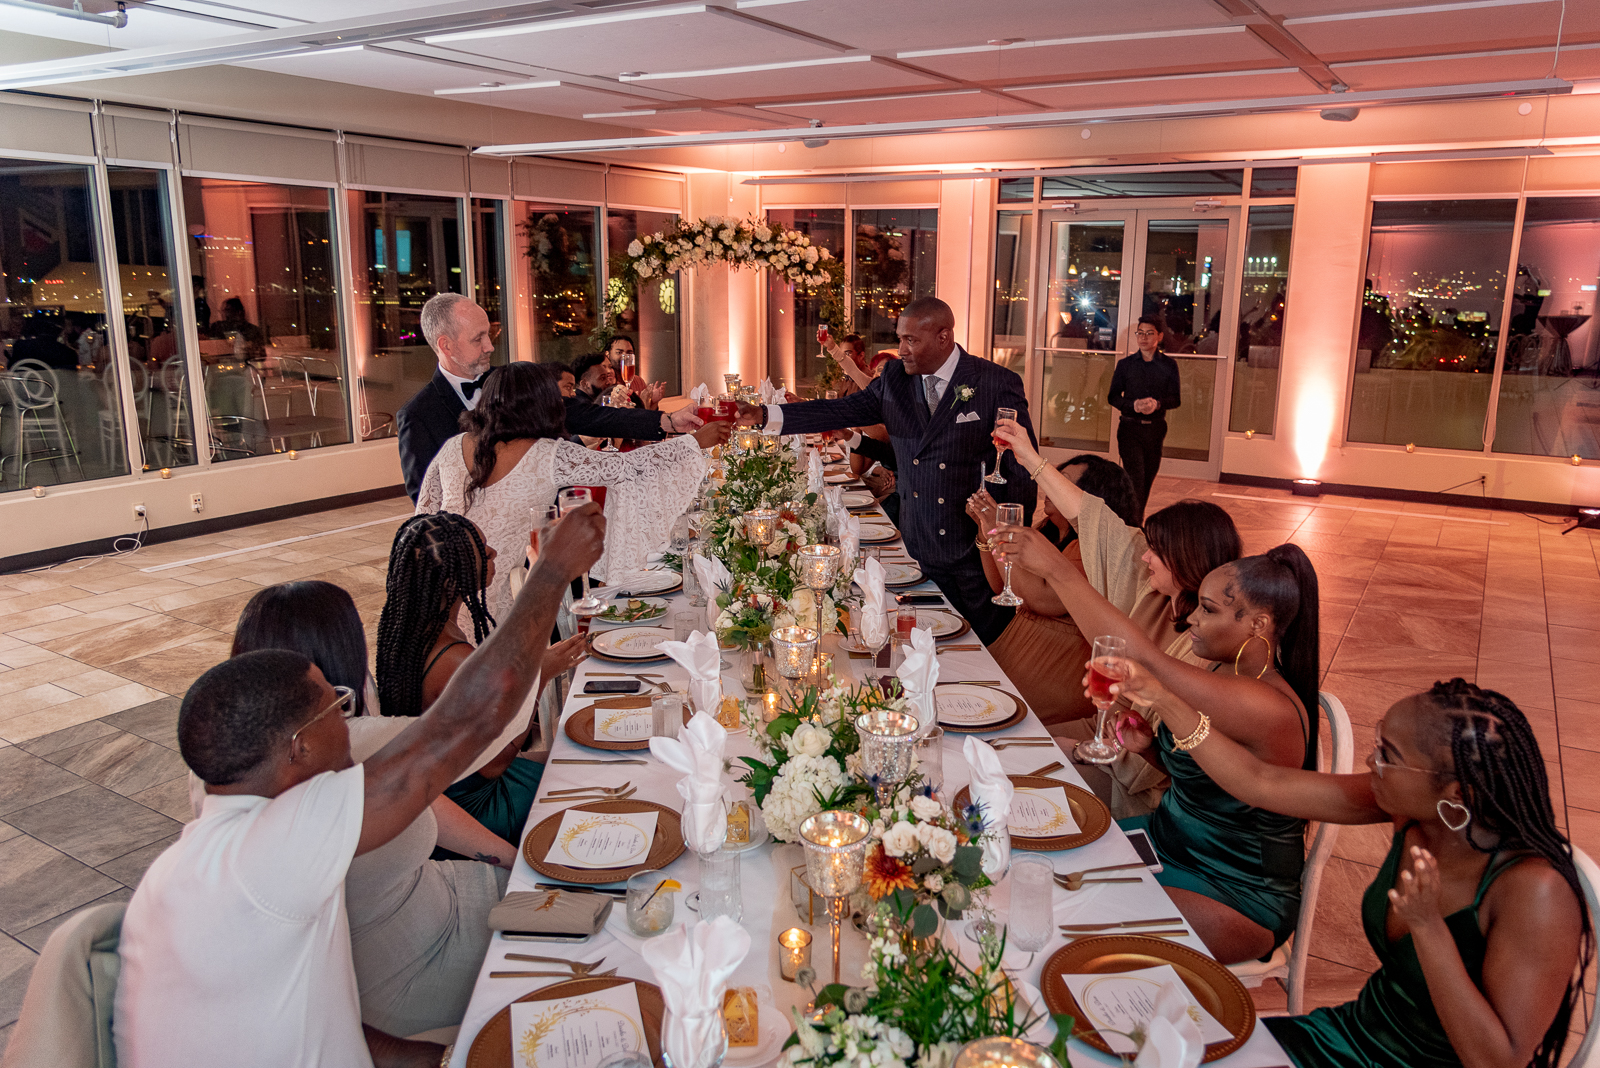 Wedding toast, bride and groom, bride's father, pink light, pink uplighting, African American wedding, romantic, urban wedding reception at Penthouse Events, Ohio City, Cleveland Flats